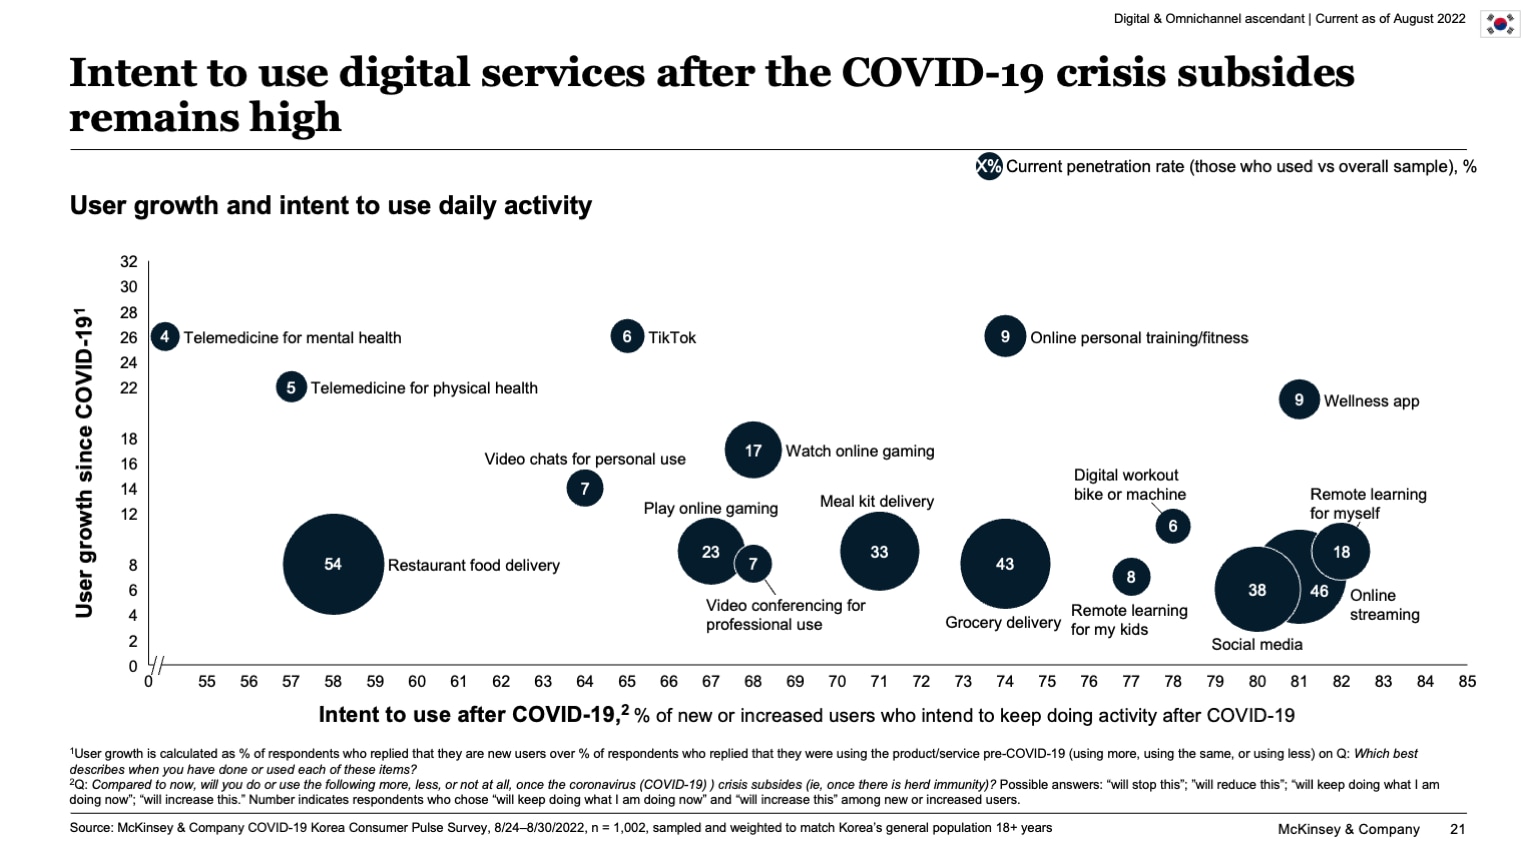 Intent to use digital services after the COVID-19 crisis subsides remains high